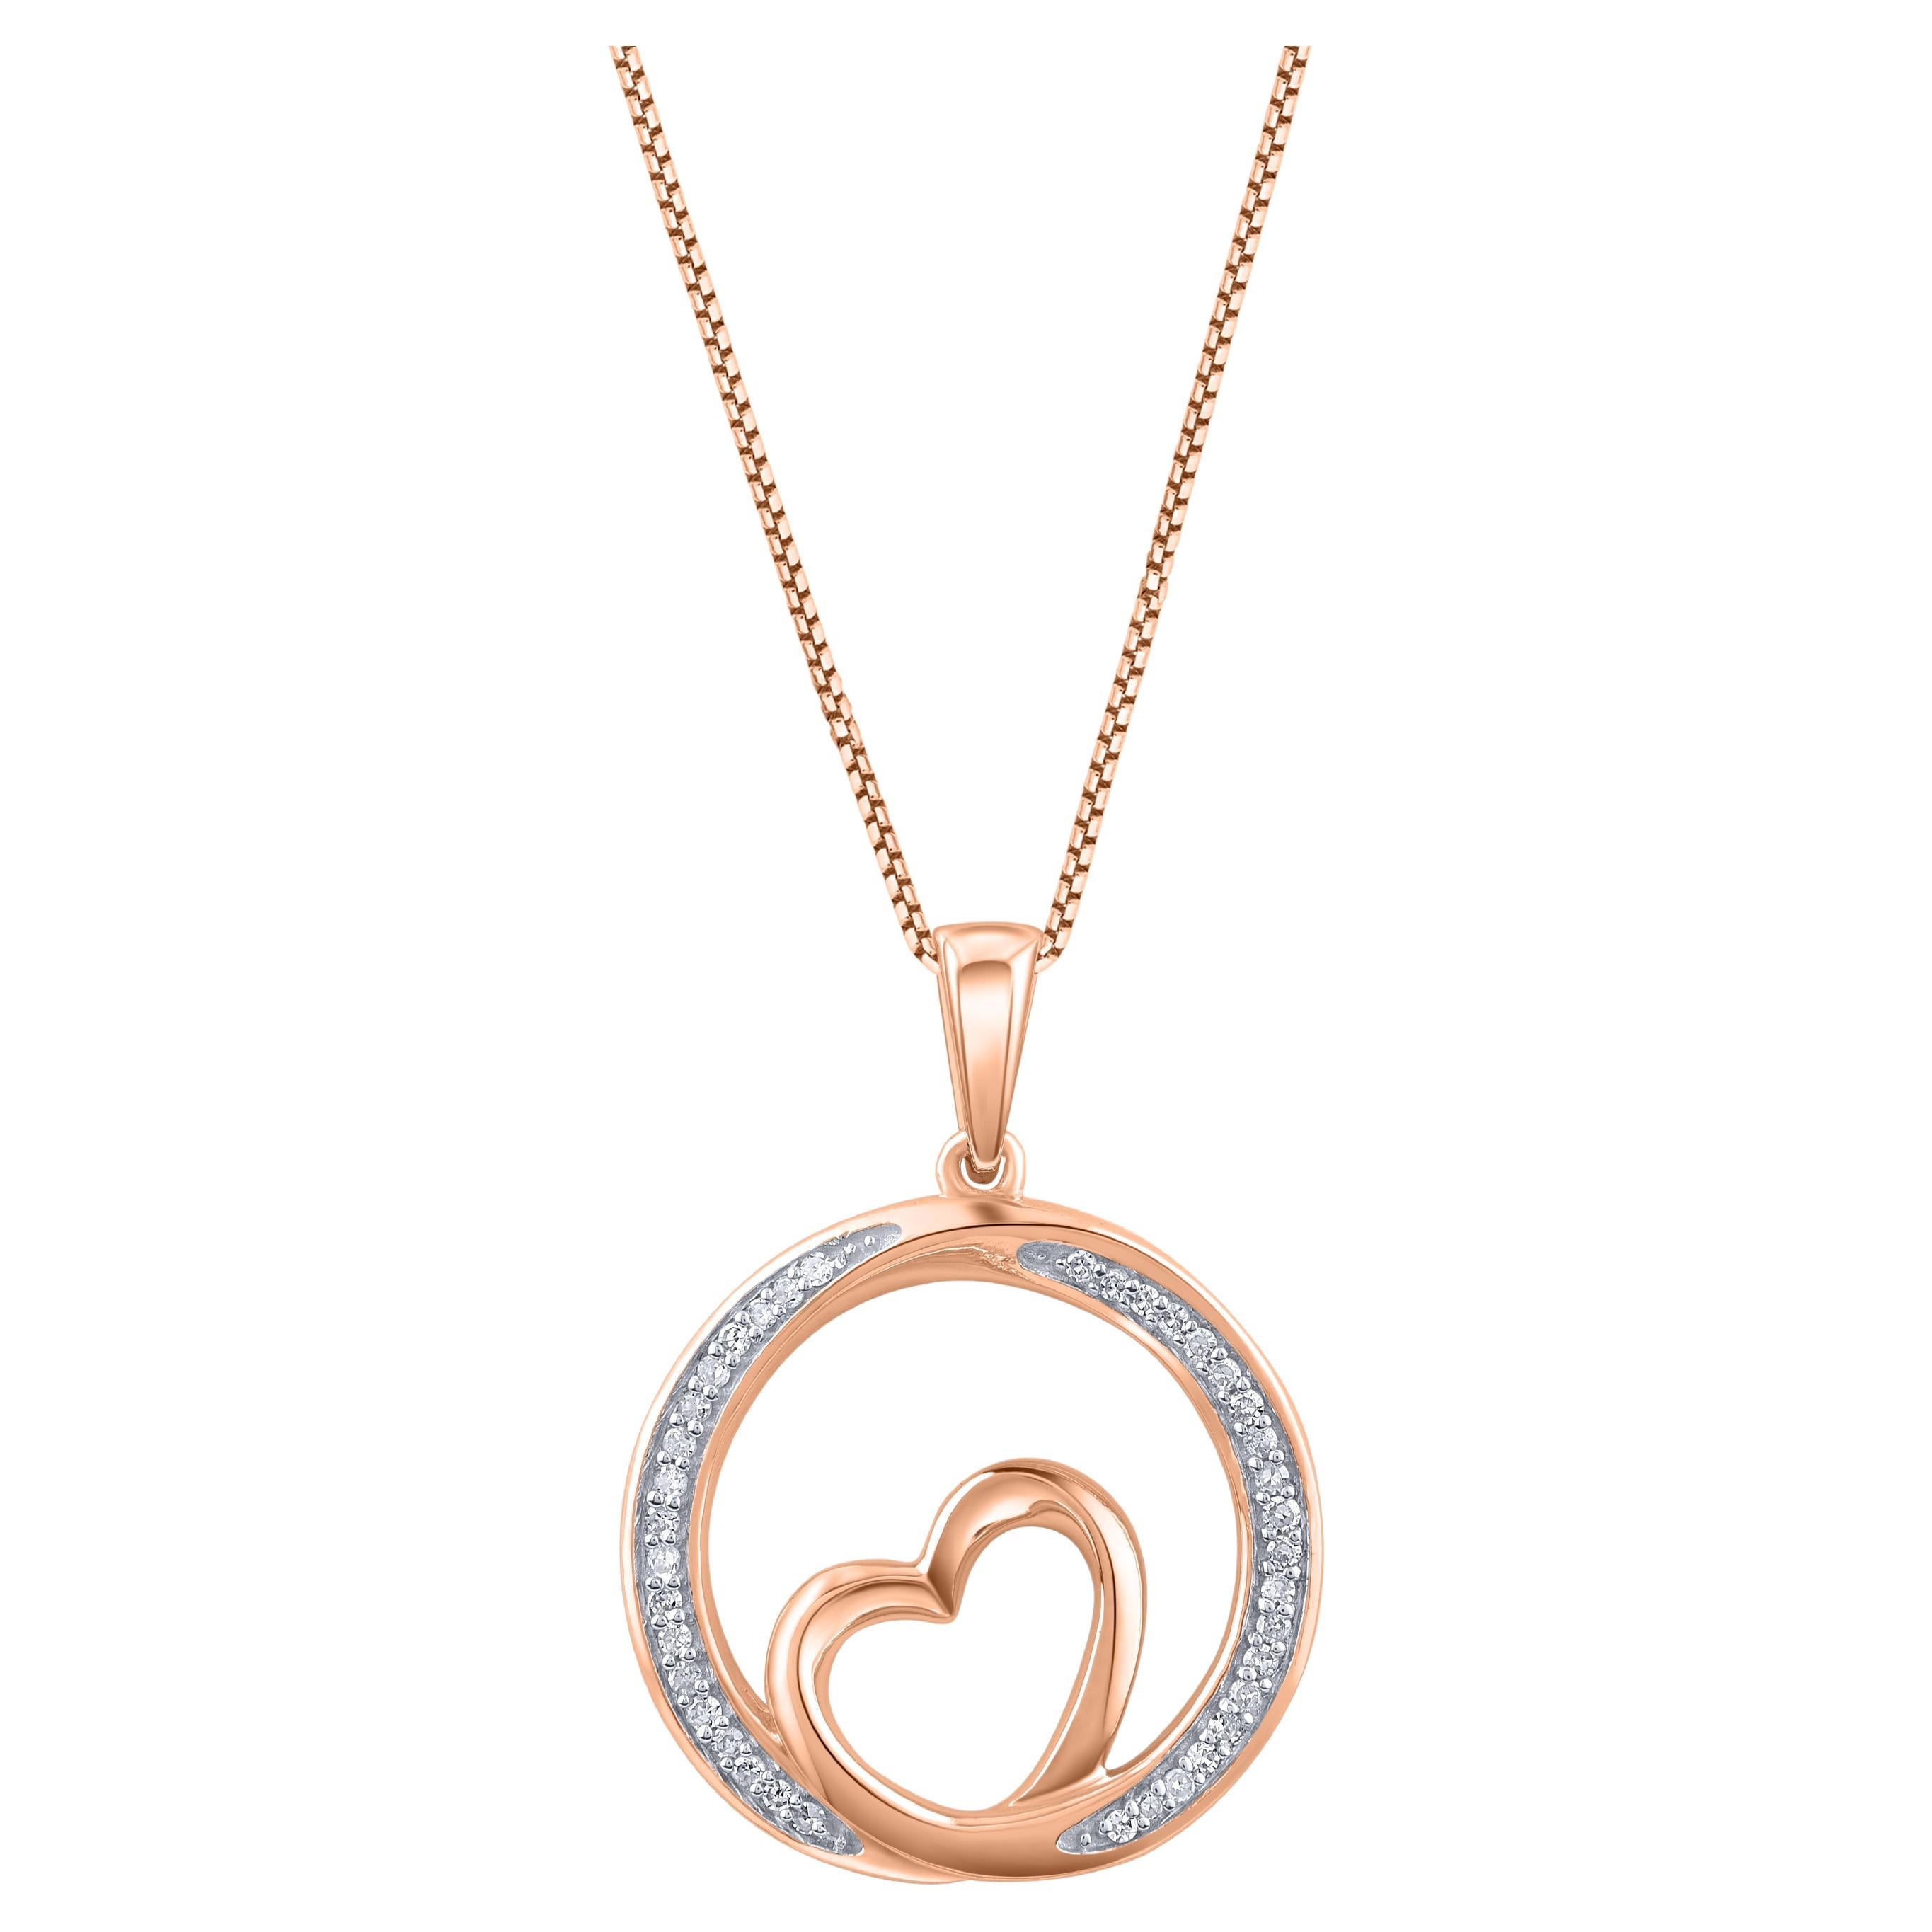 TJD 0.10 Carat Natural Diamond 14KT Rose Gold Heart in Circle Pendant Necklace For Sale